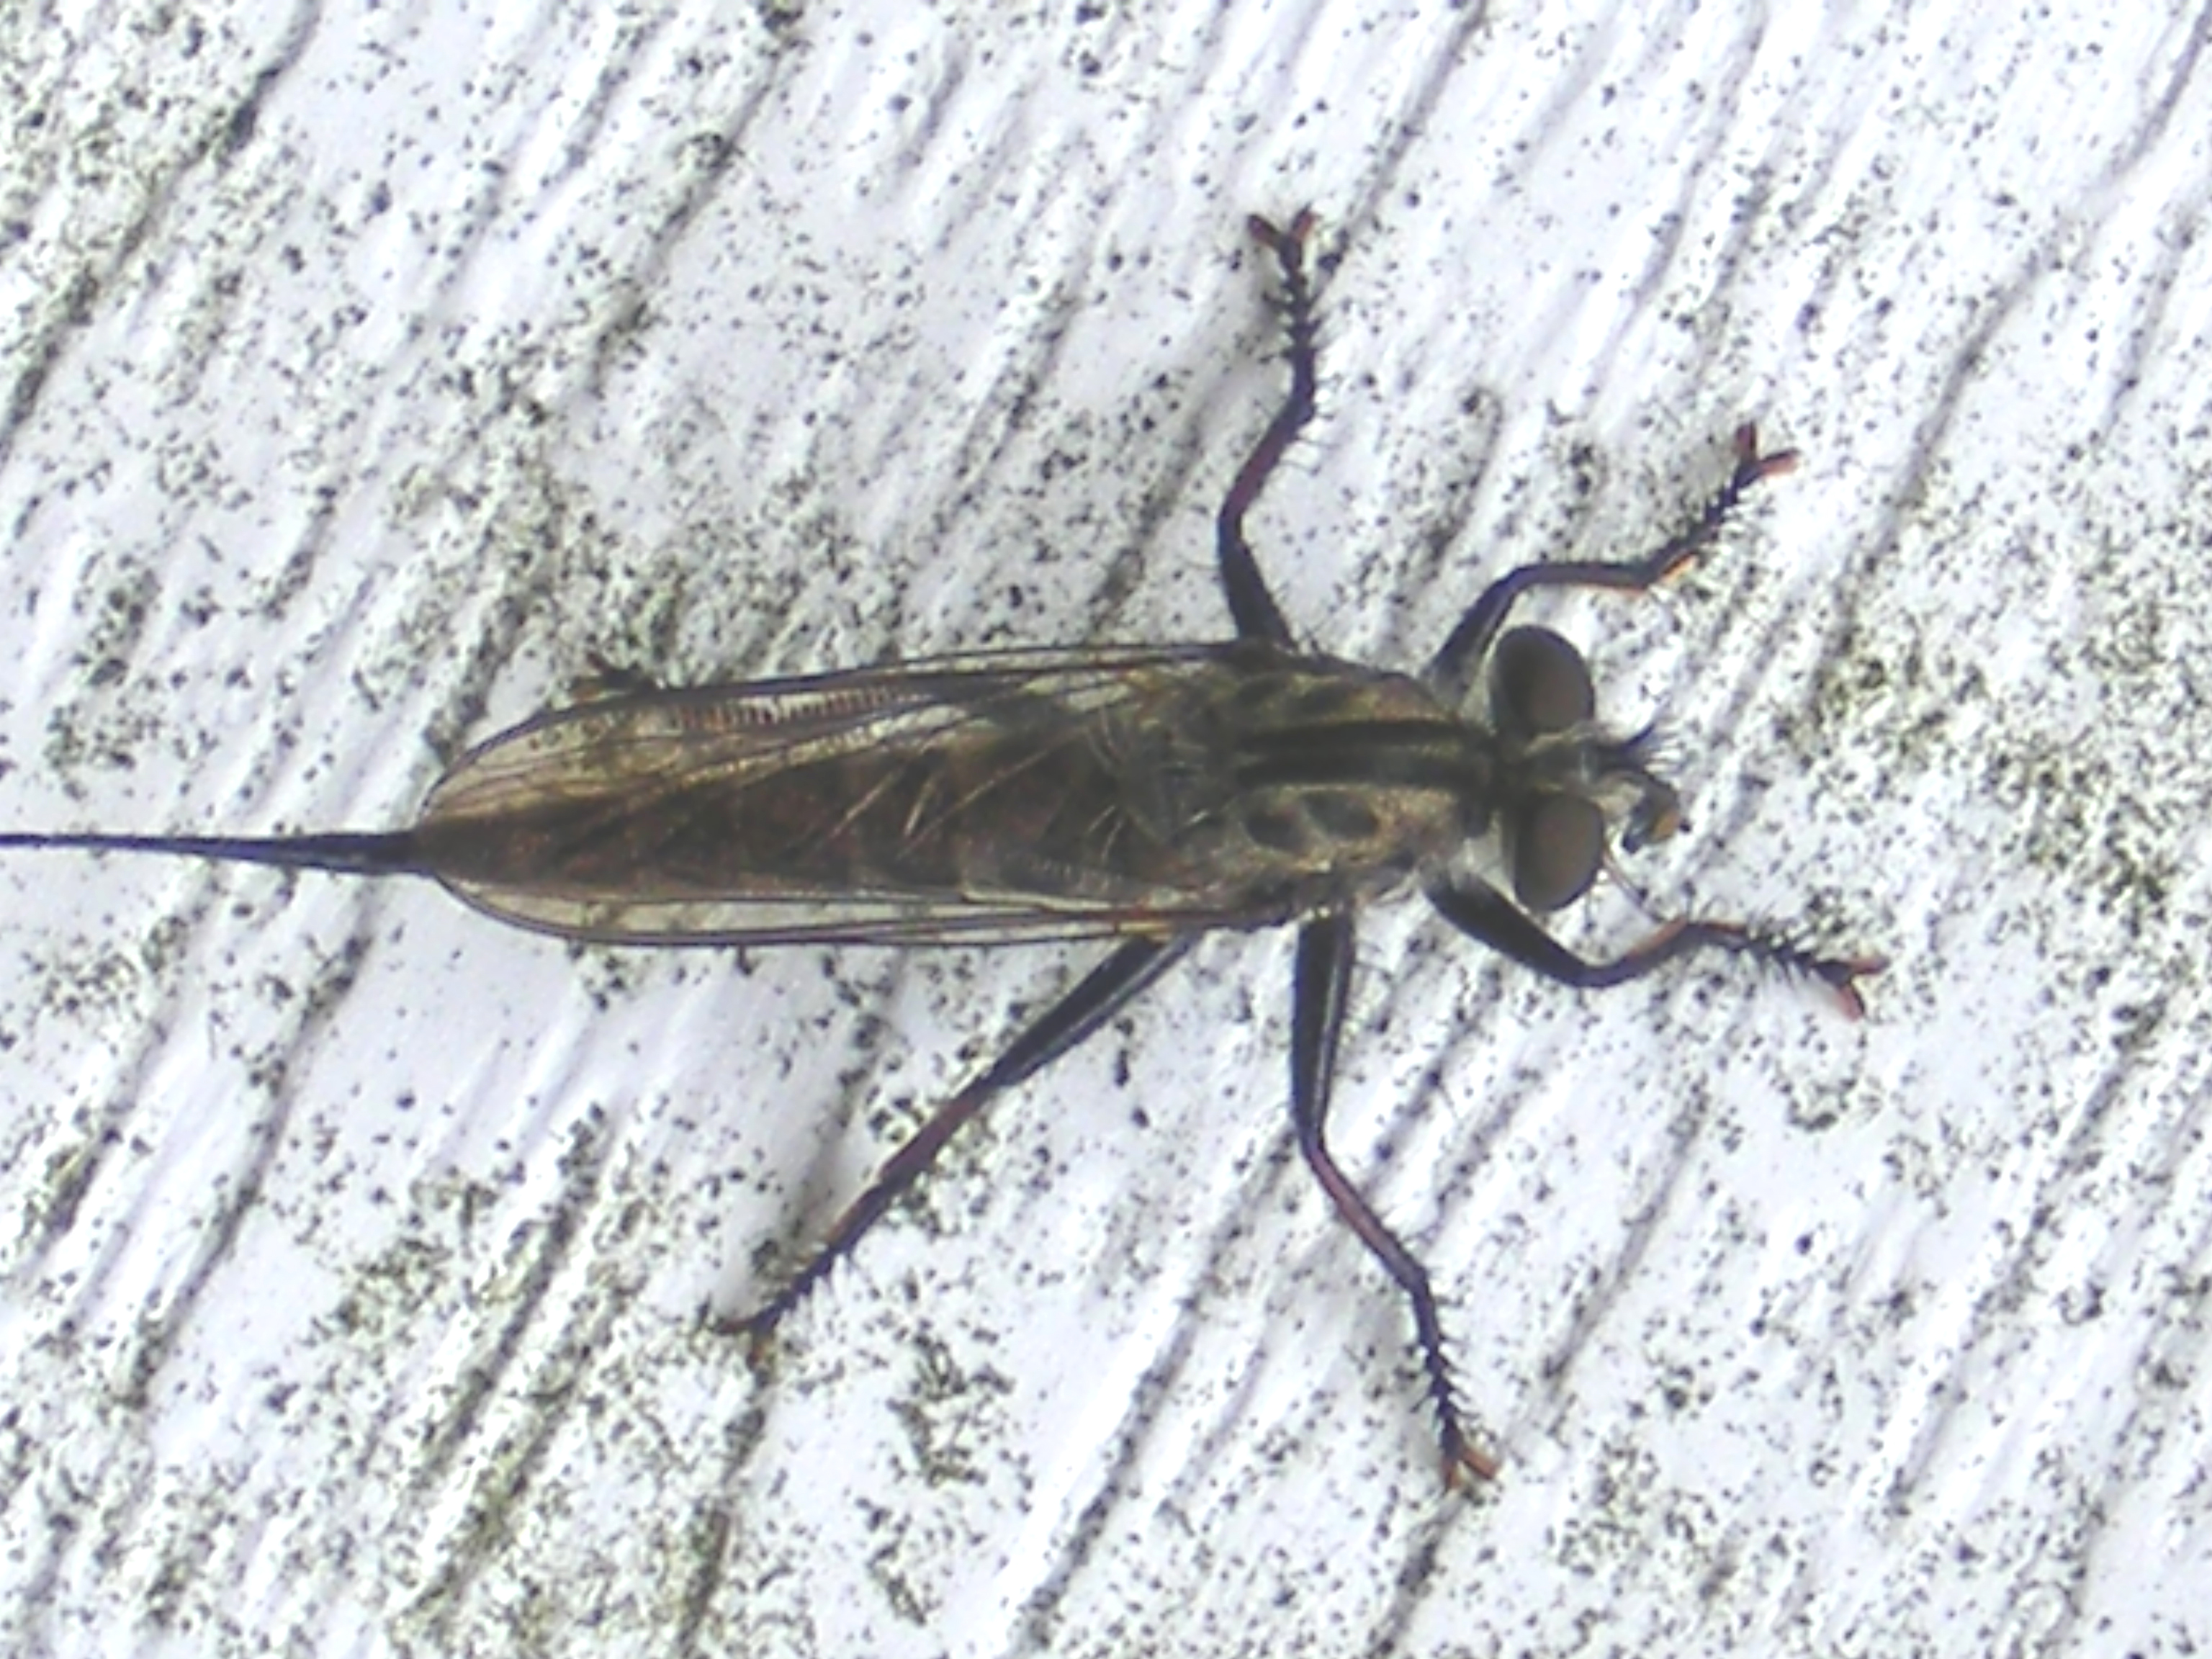 Random Insect: Robber fly | The Life of Your Time